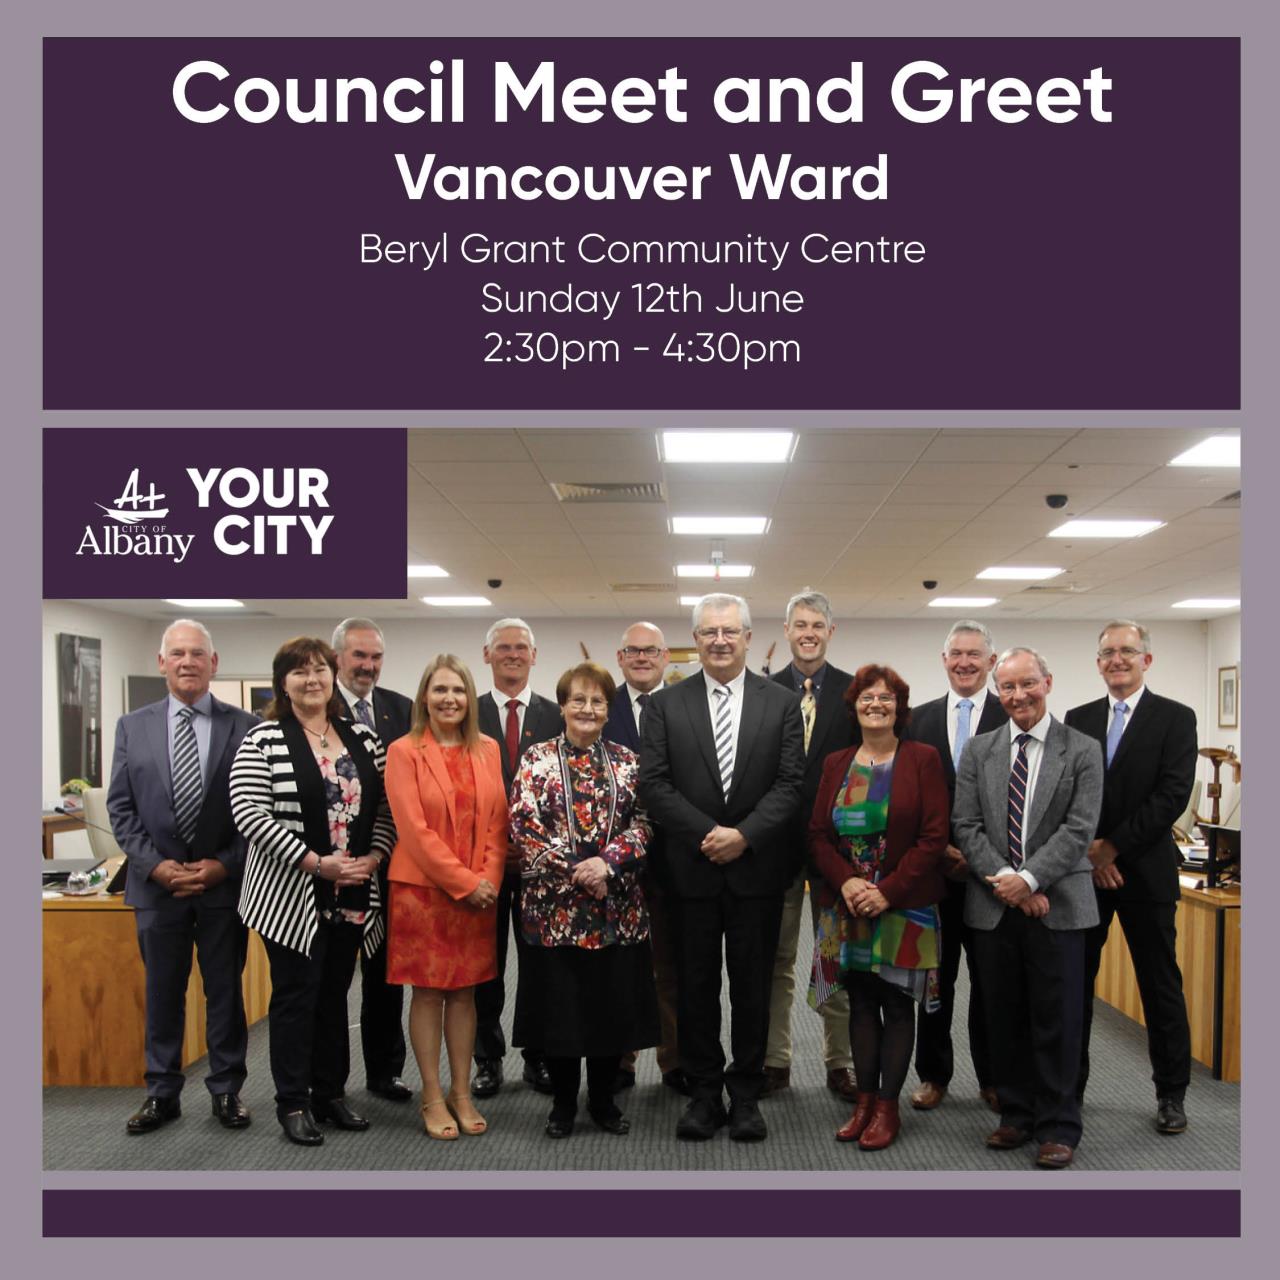 Council Meet and Greet Vancouver Ward